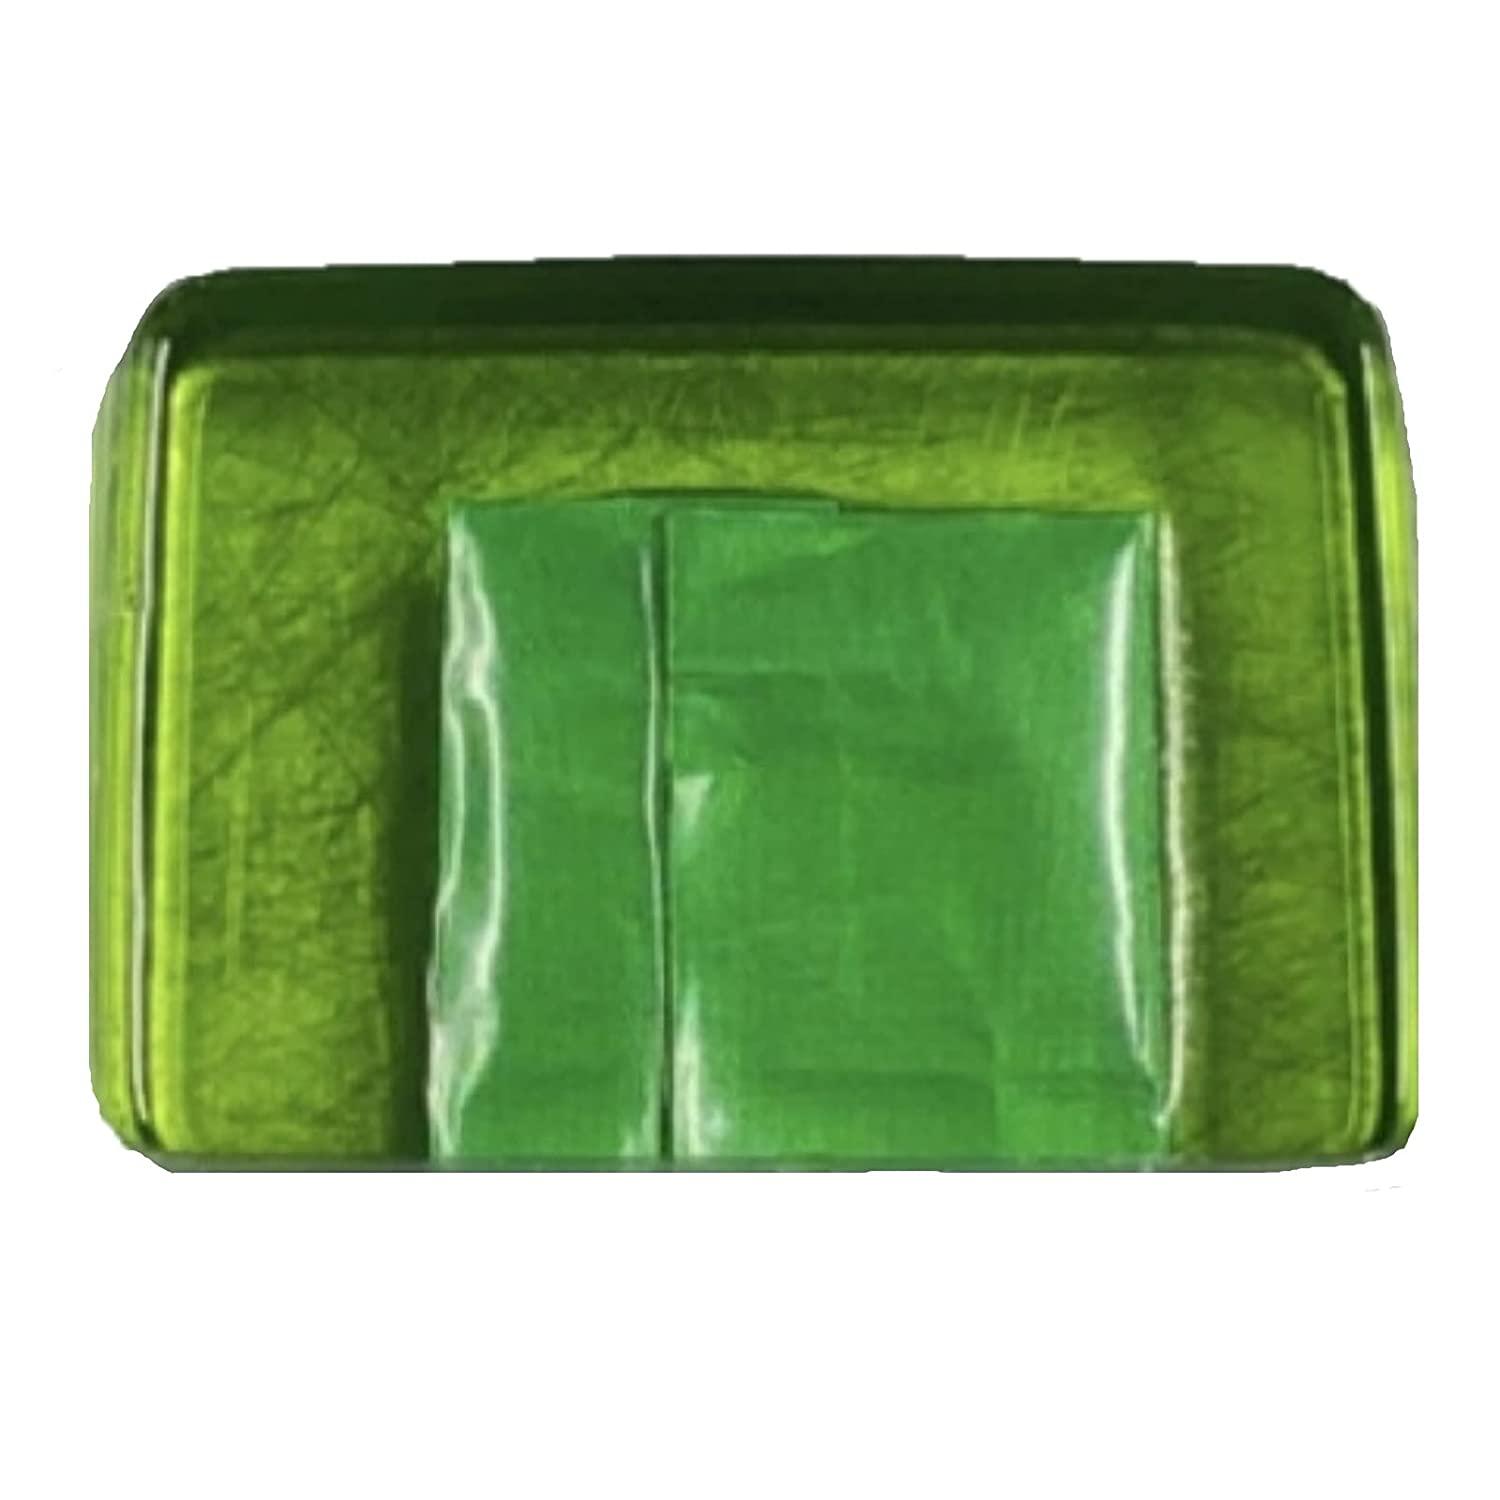 The Money Cube Soap Bar Real Cash Up To 100 Dollars Jackpot Green With –  The Money Soap